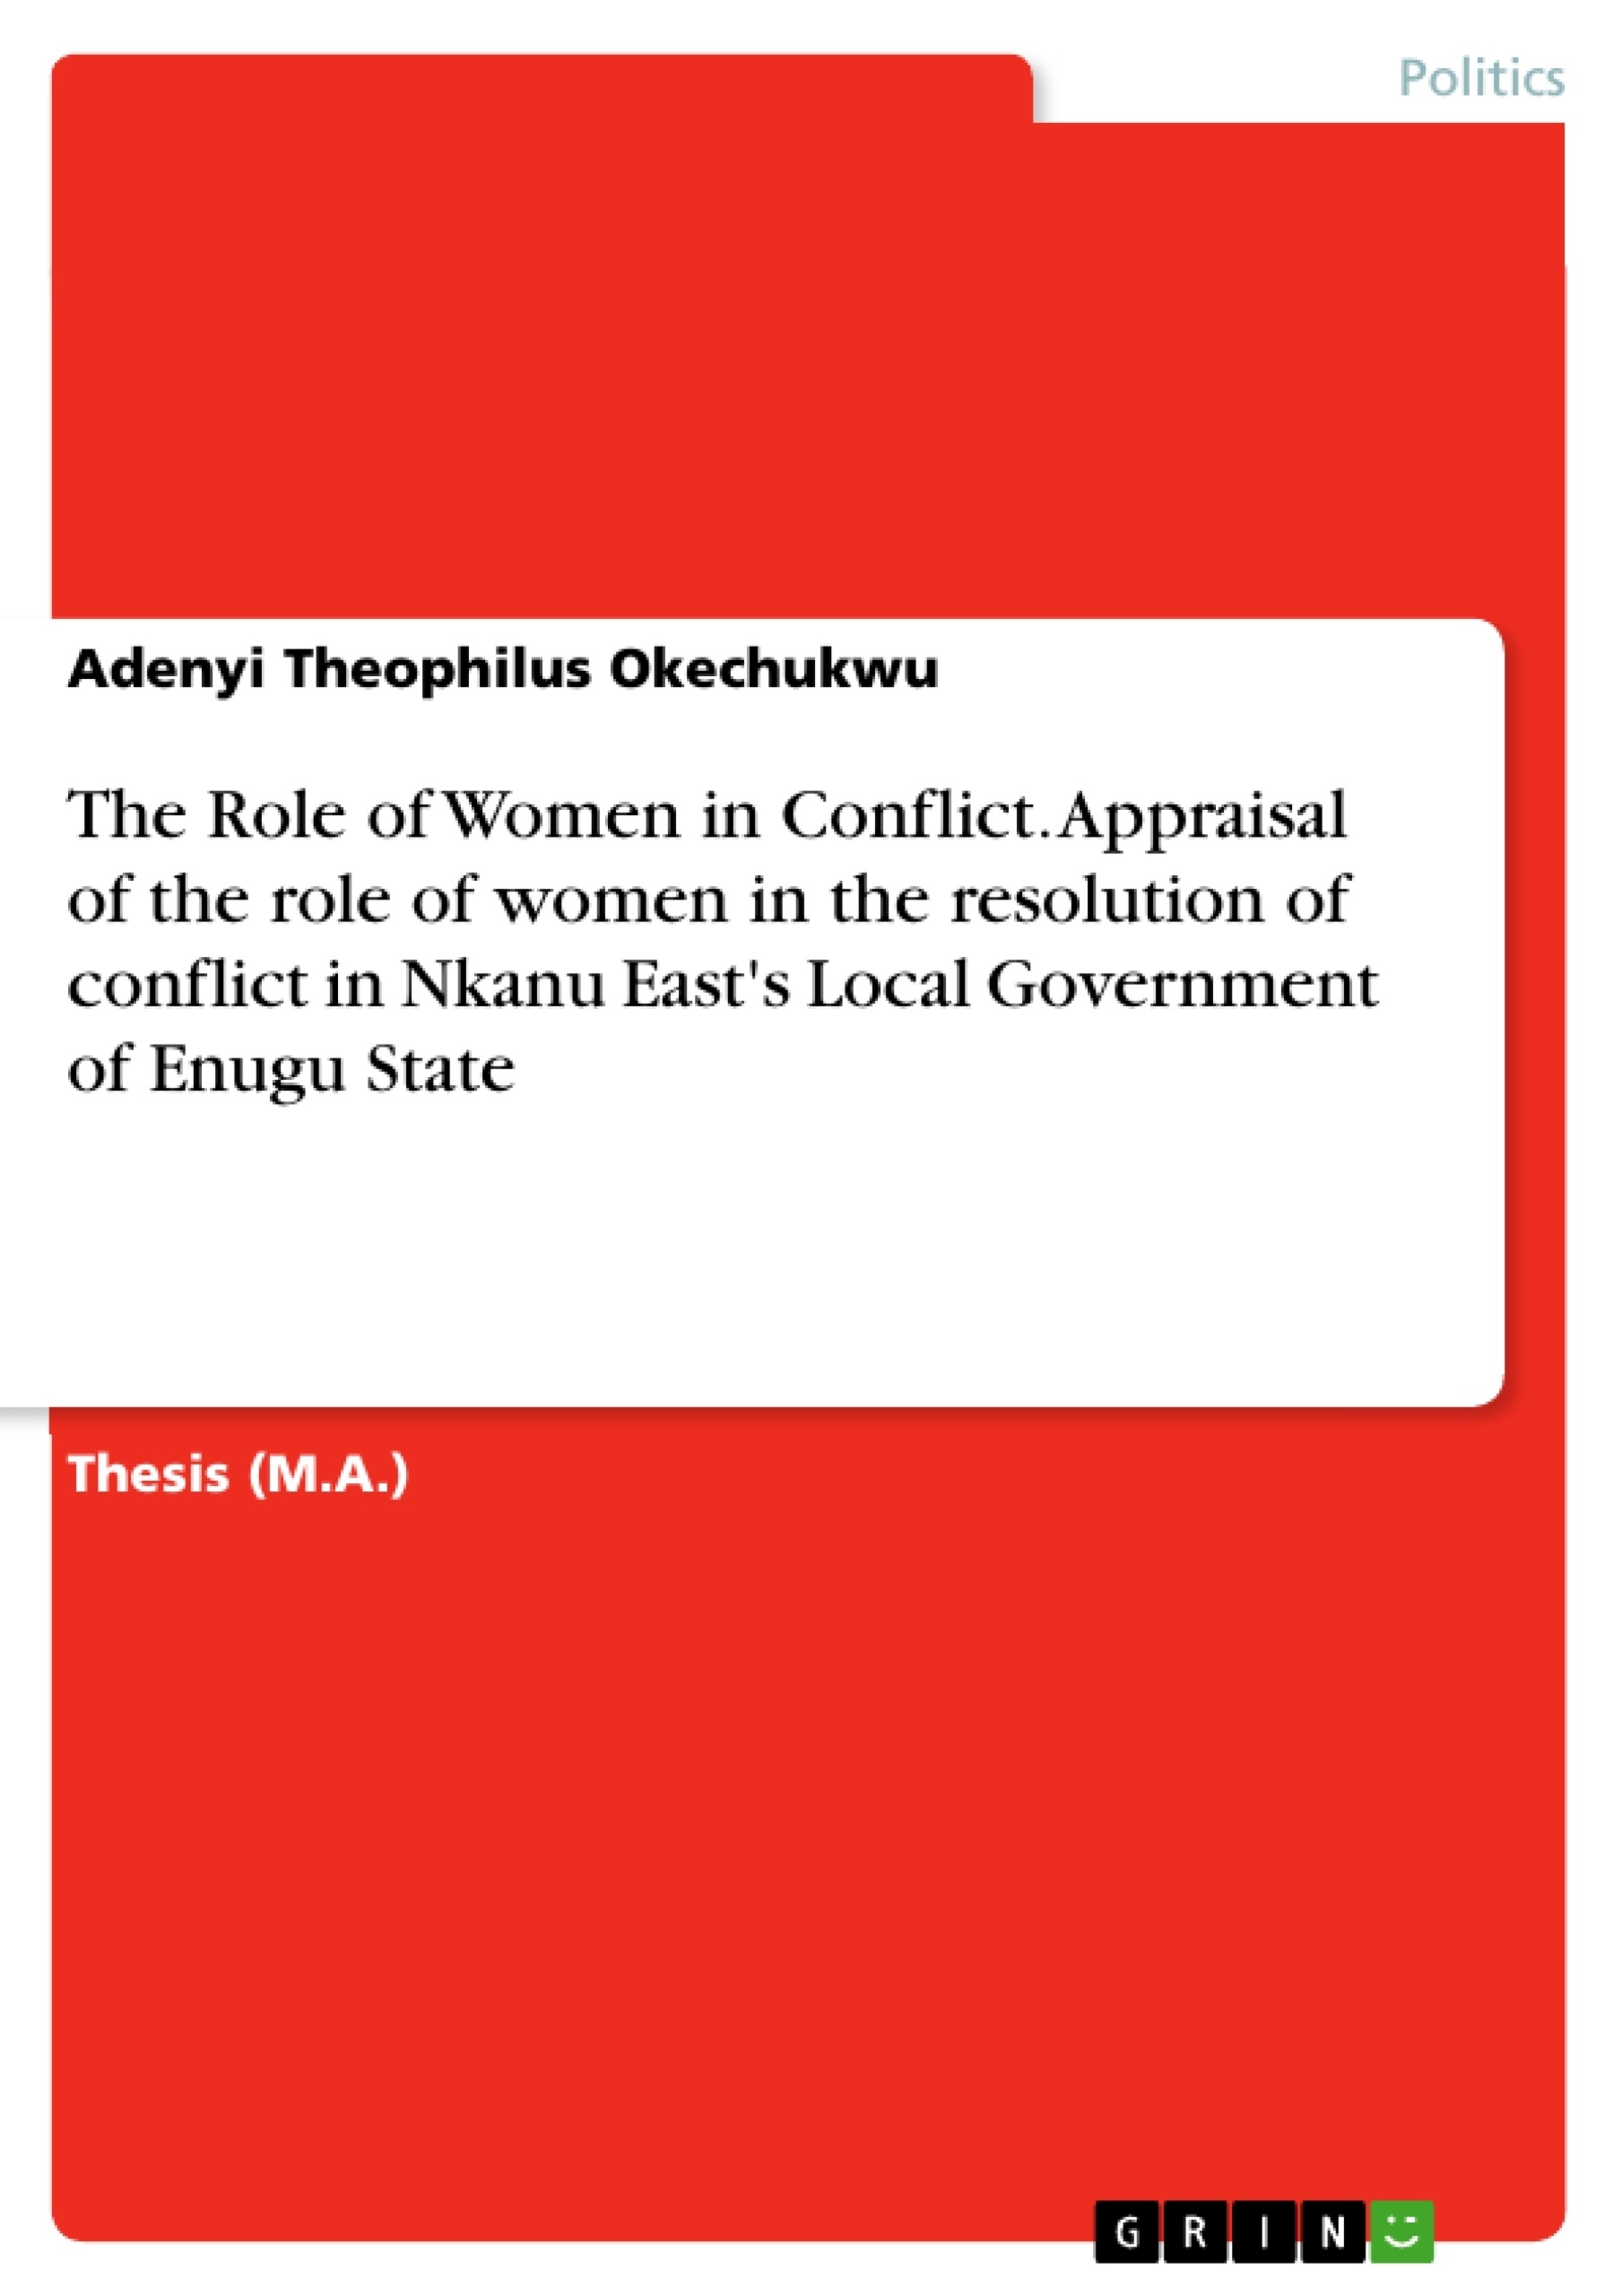 Title: The Role of Women in Conflict. Appraisal of the role of women in the resolution of conflict in Nkanu East's Local Government of Enugu State